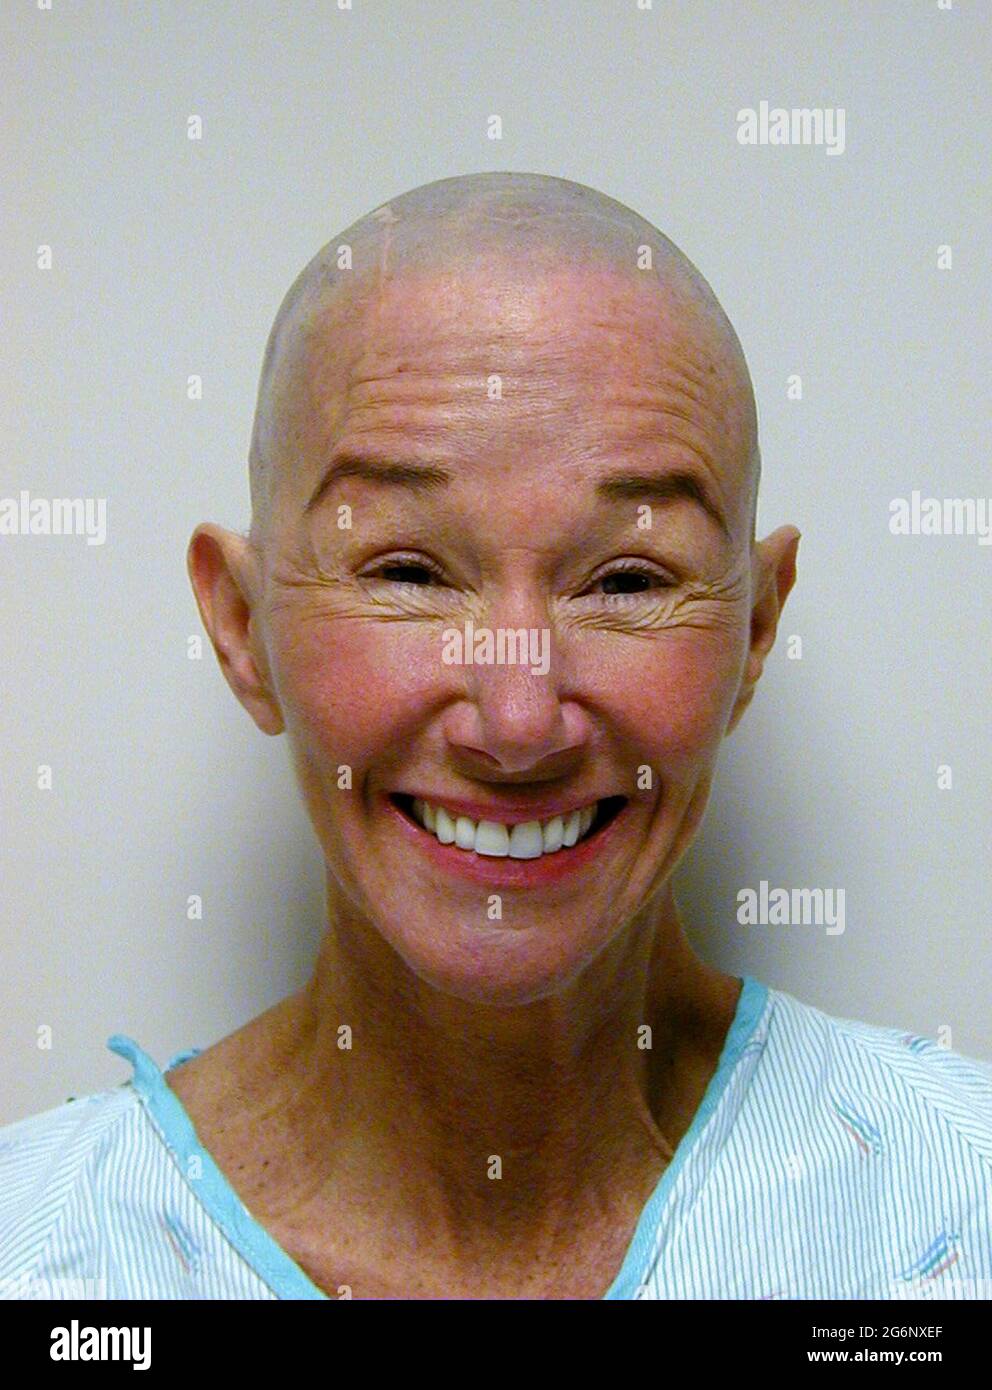 A bald American woman who suffers from epilepsy offers a big smile after her head was shaved in a hospital prior to an operation on her brain. Her hair was totally removed before the surgeon cut into her scalp and skull (cranium) to perform a temporal lobectomy, a surgery that can lower the number of seizures, make them less severe, or even stop them from happening. During this medical procedure, the doctor removes some of the temporal lobe of her brain where most seizures start. (2nd of 7 related images.) Model released. Stock Photo